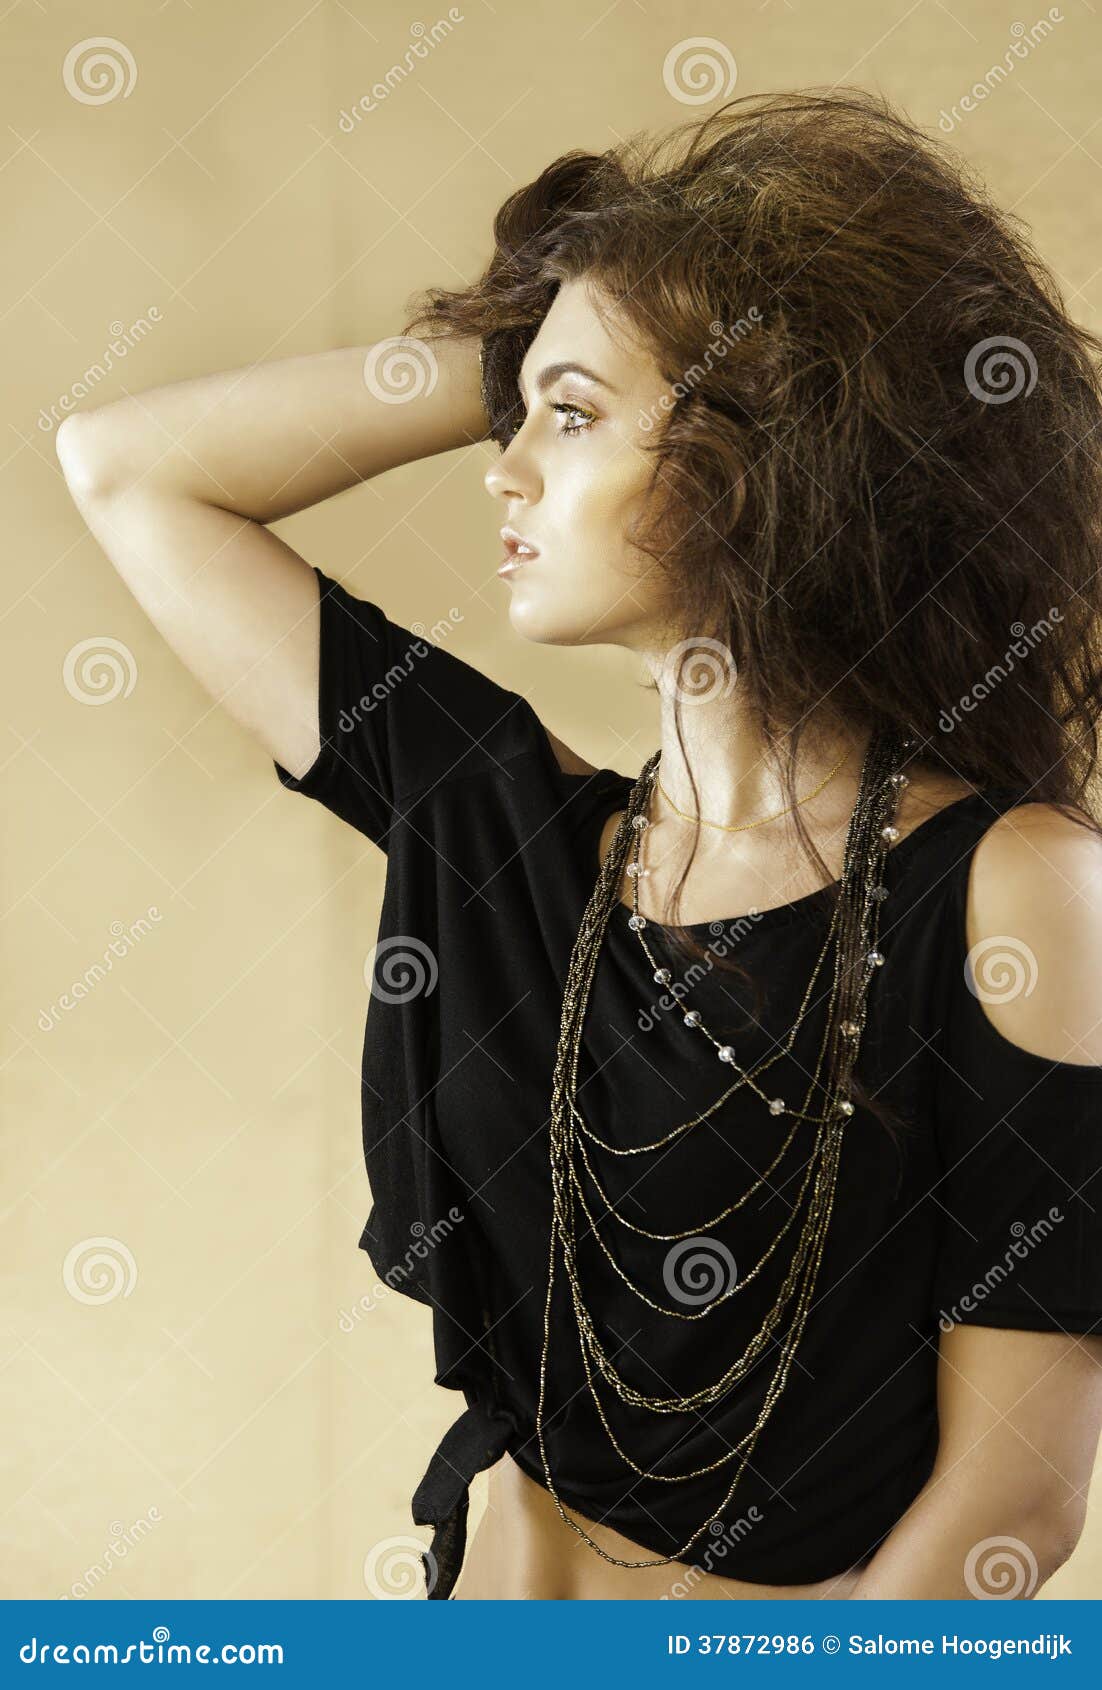 portrait of beautiful woman with wild auburn hair looking to the side